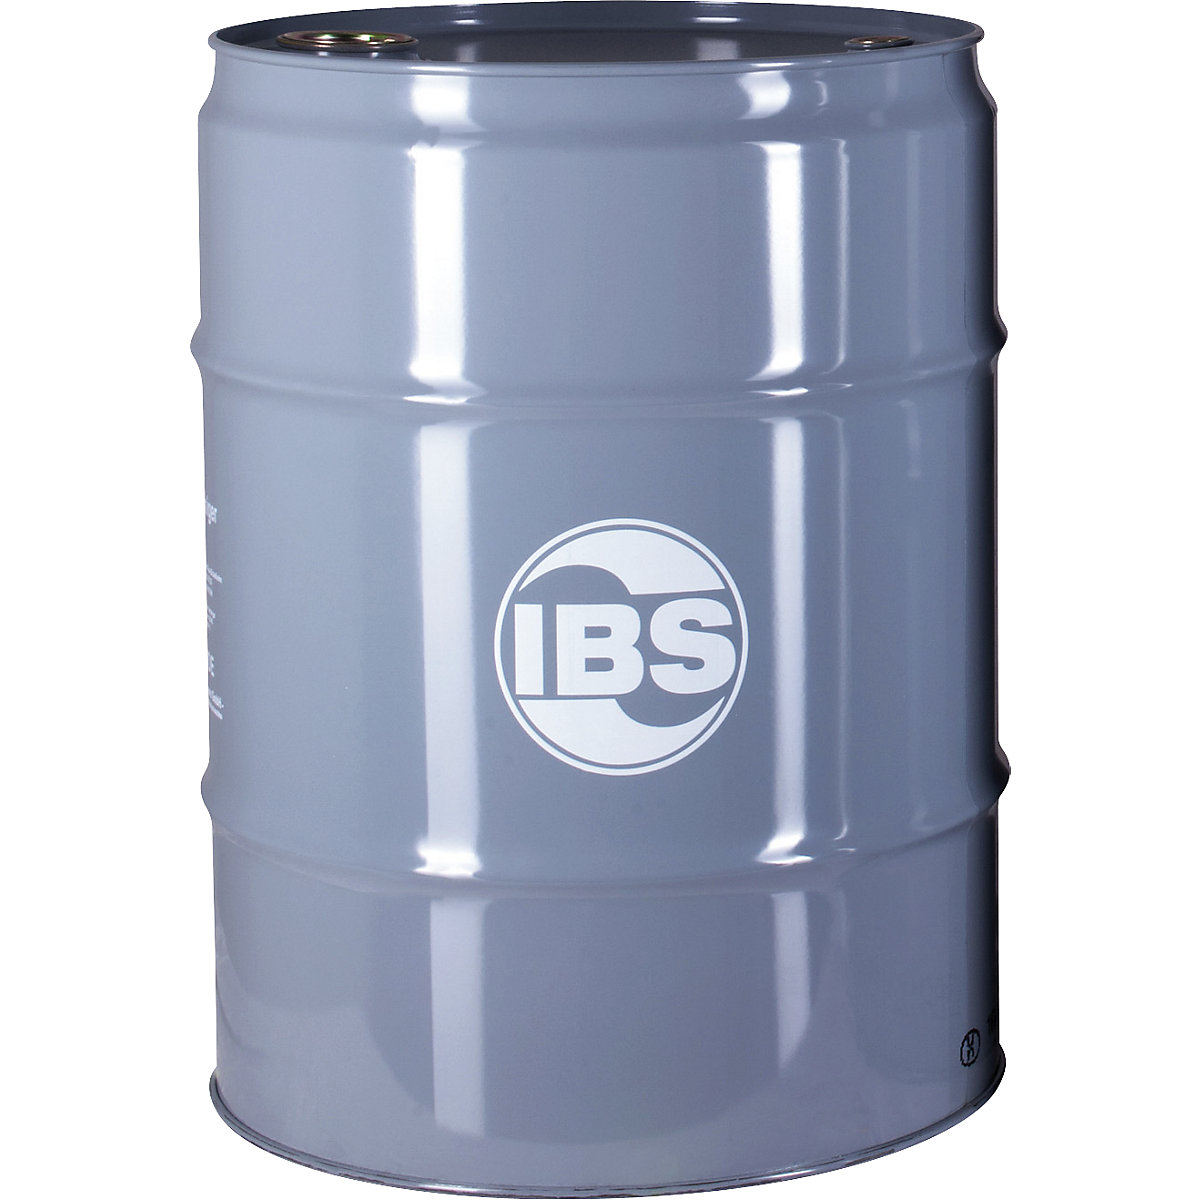 EL/Extra special cleaning solution - IBS Scherer